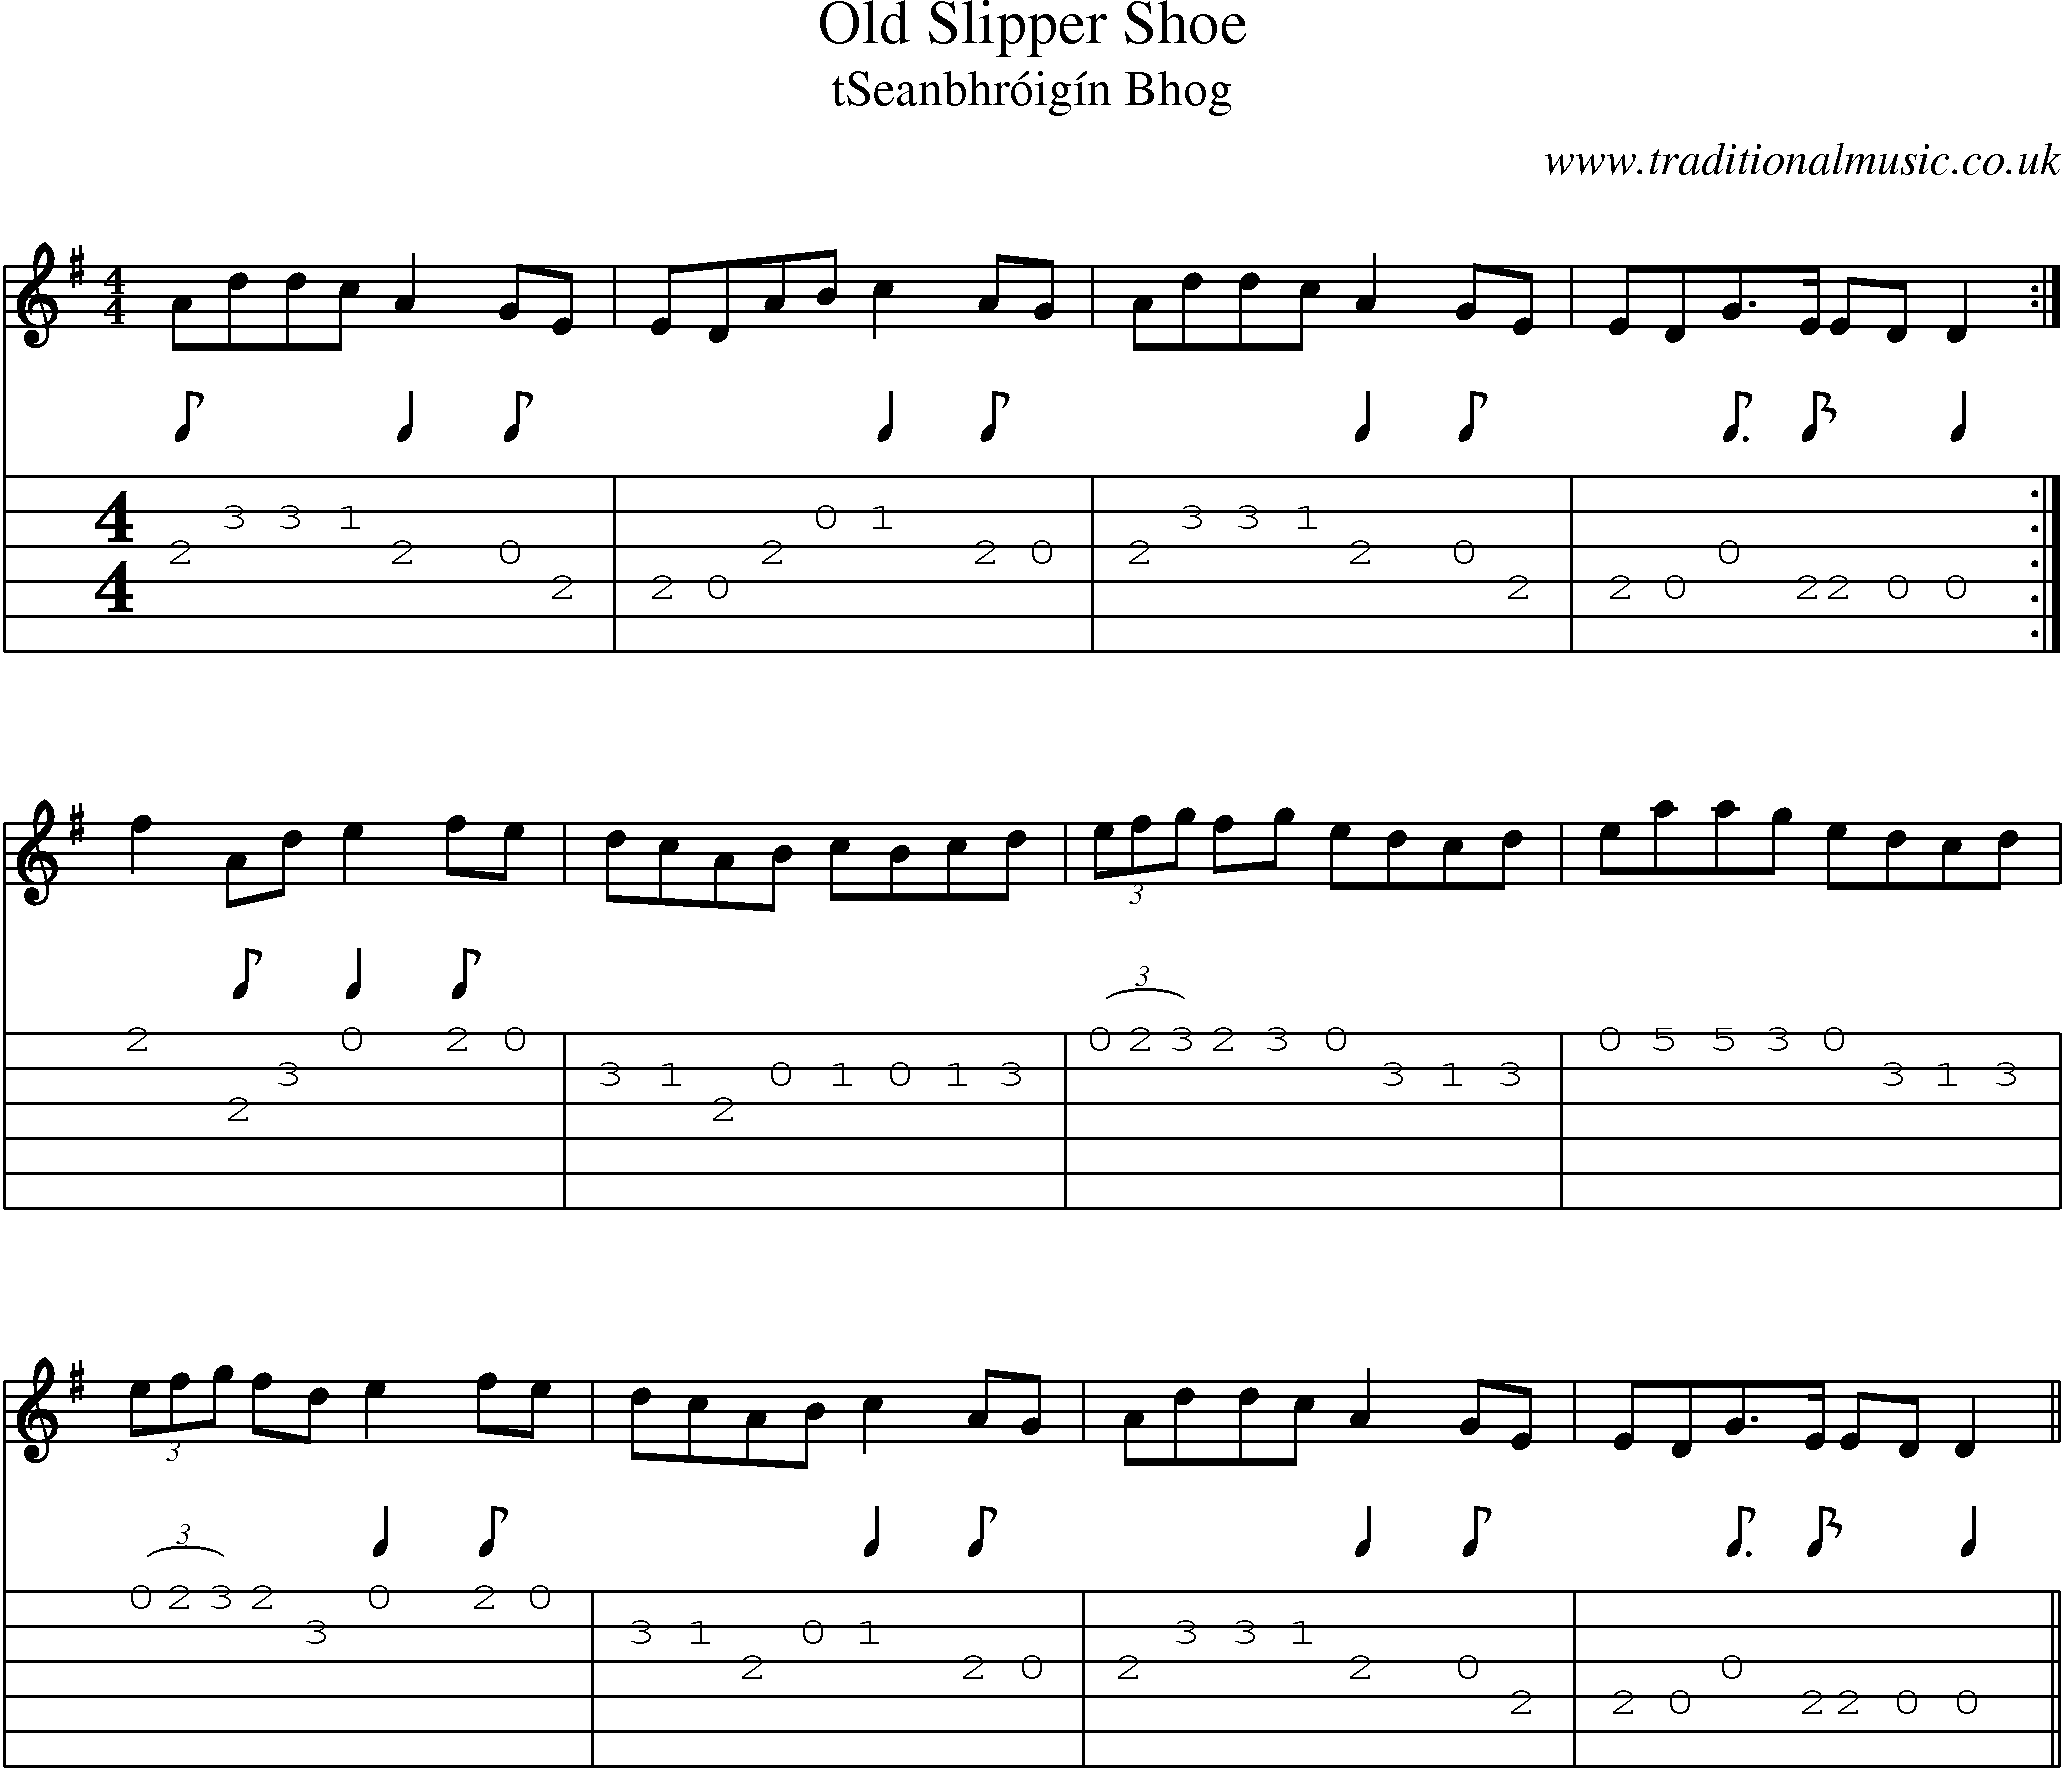 Music Score and Guitar Tabs for Old Slipper Shoe